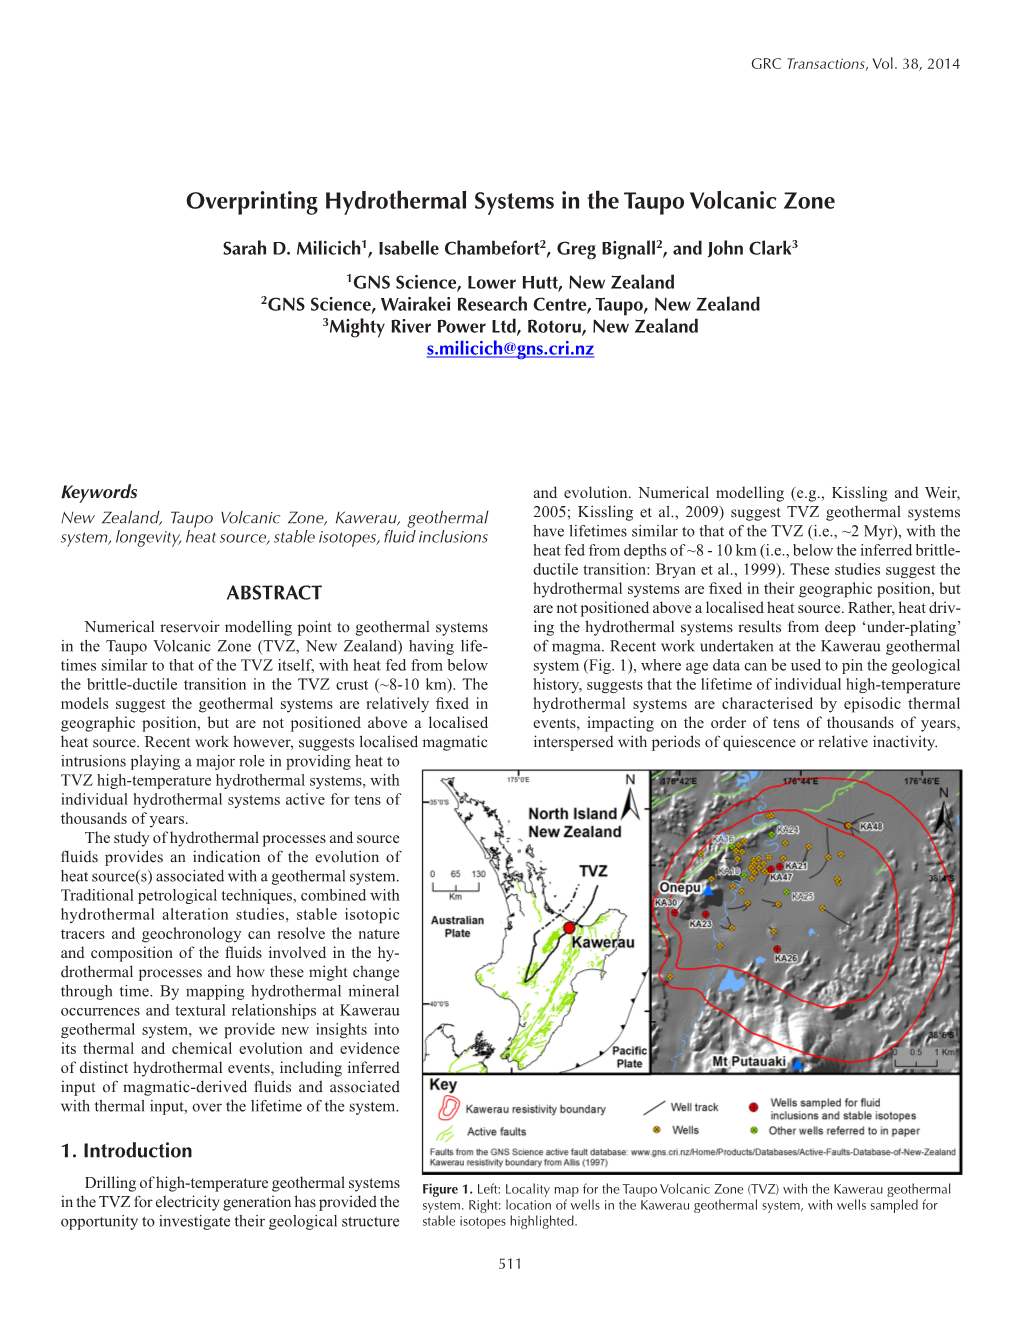 Overprinting Hydrothermal Systems in the Taupo Volcanic Zone